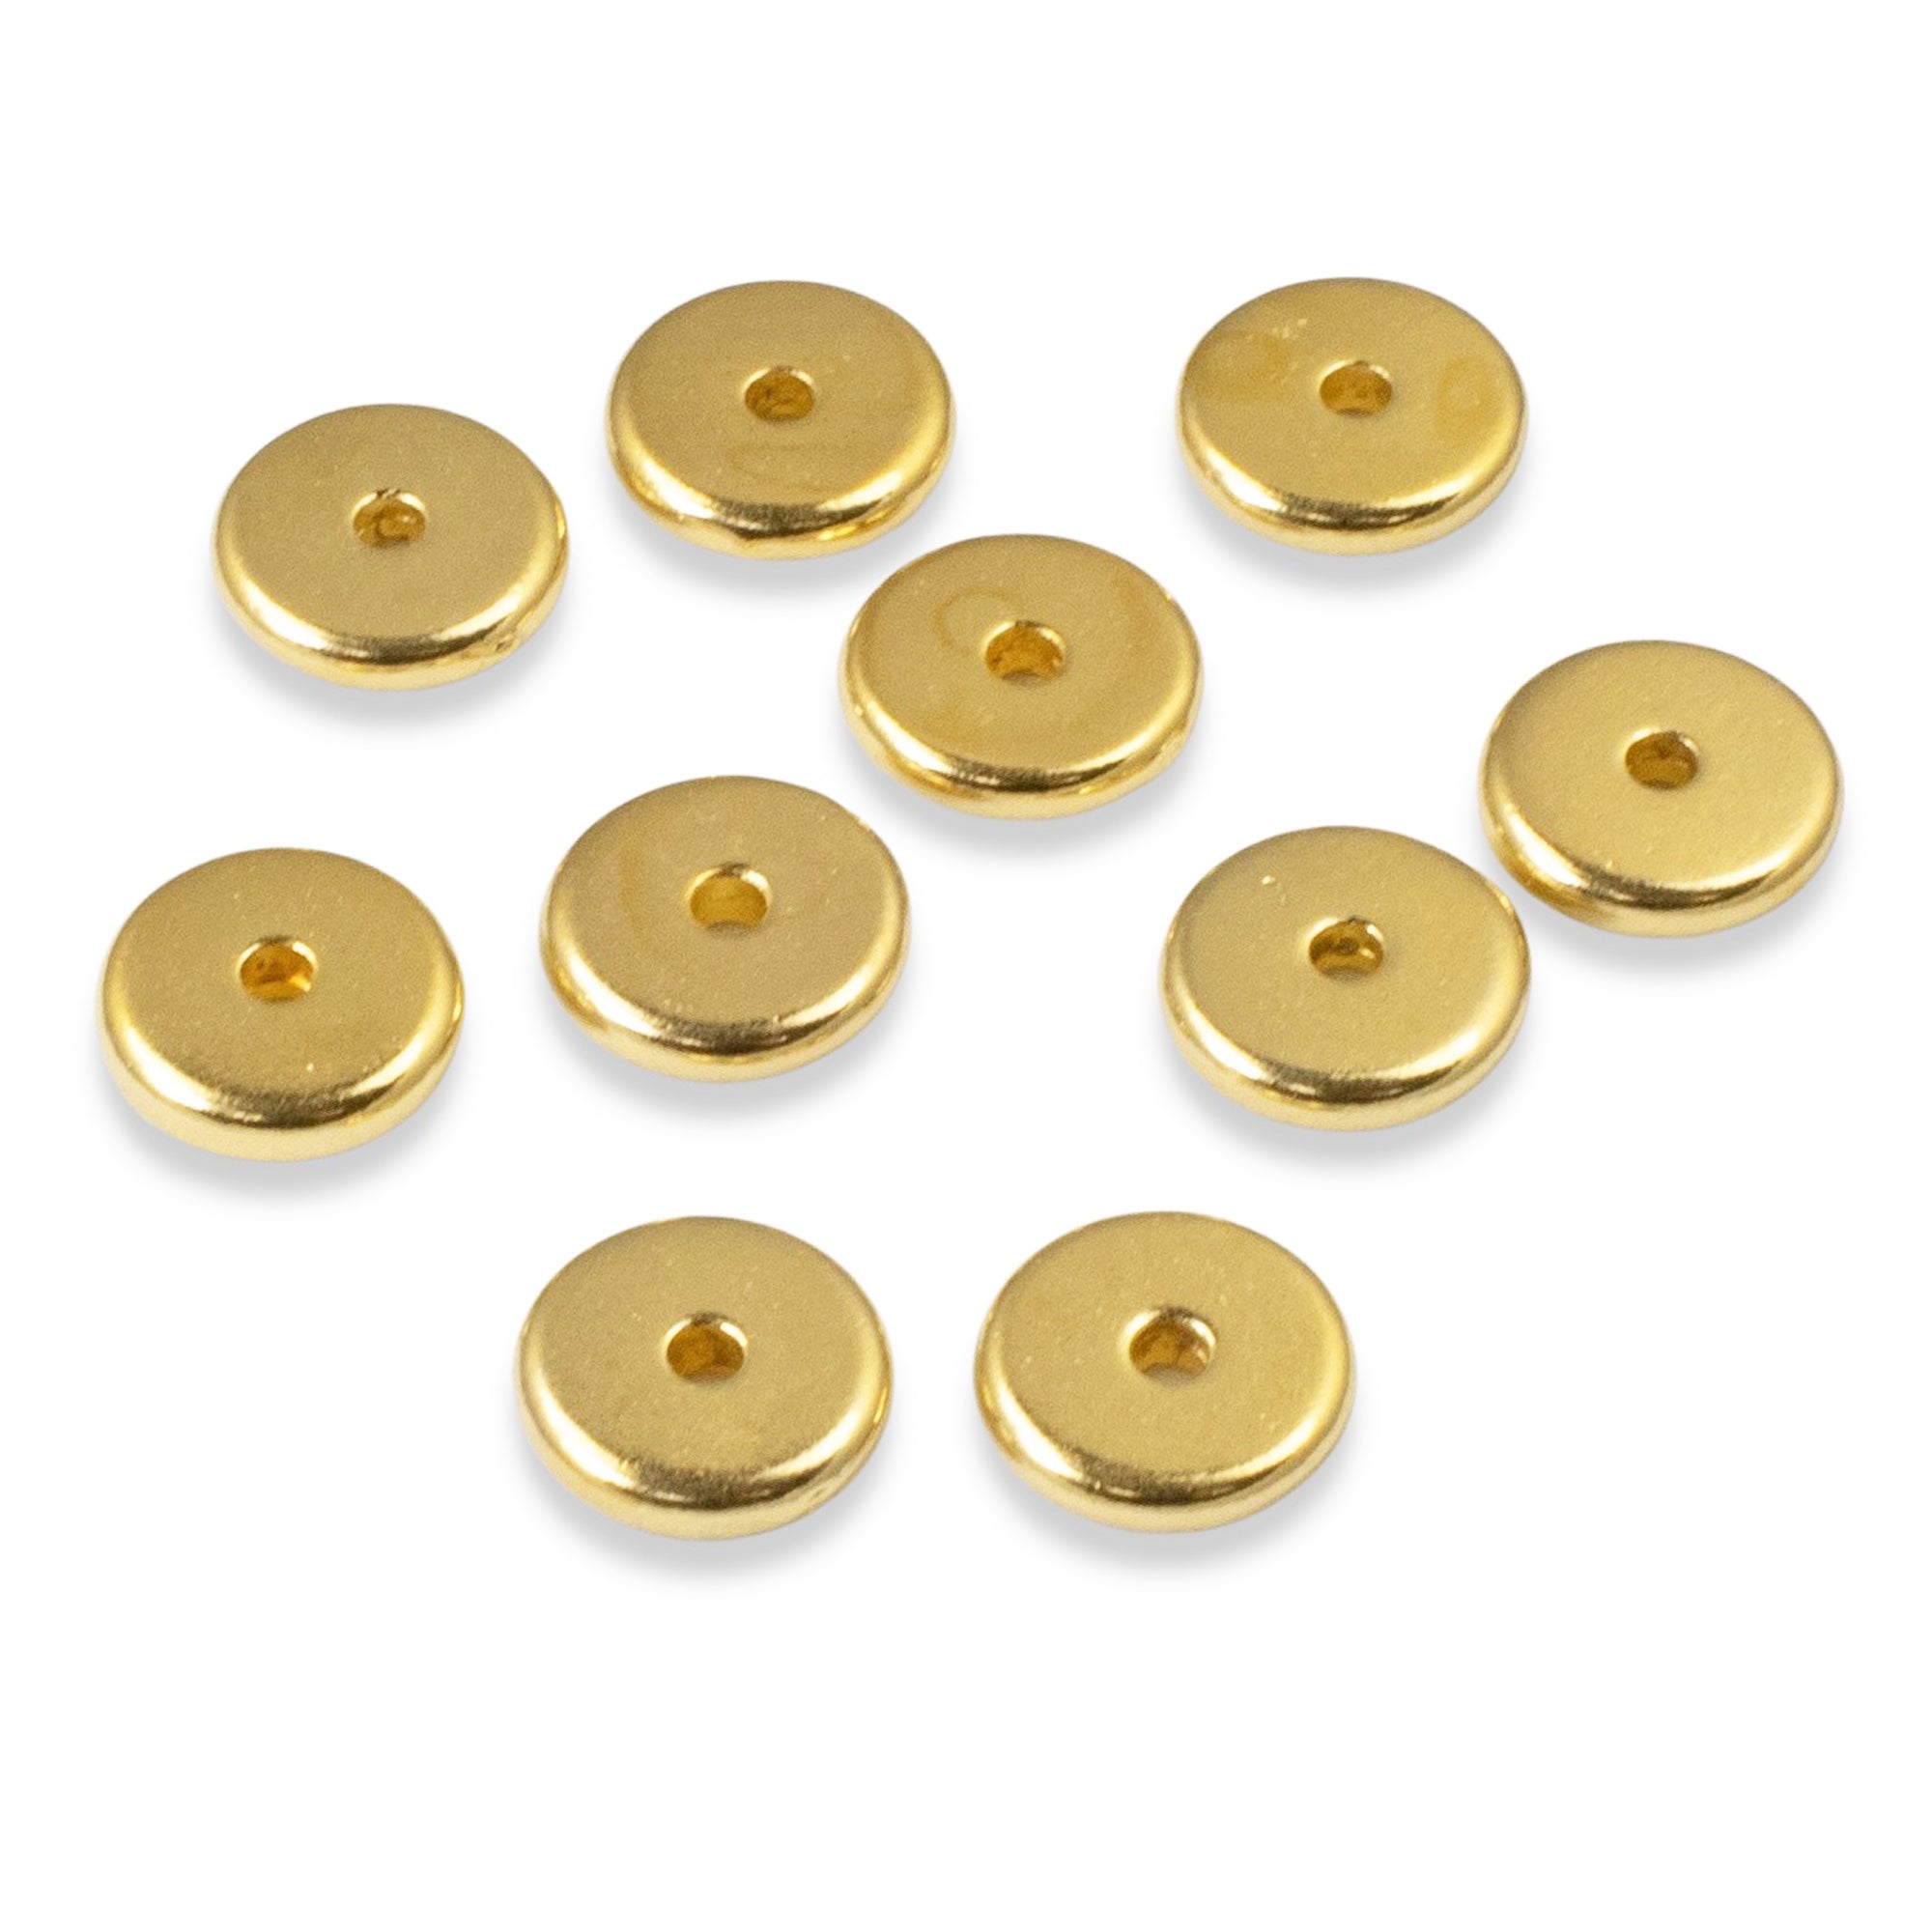 8mm Gold double disc beads, bracelet beads heishi beads, spacer